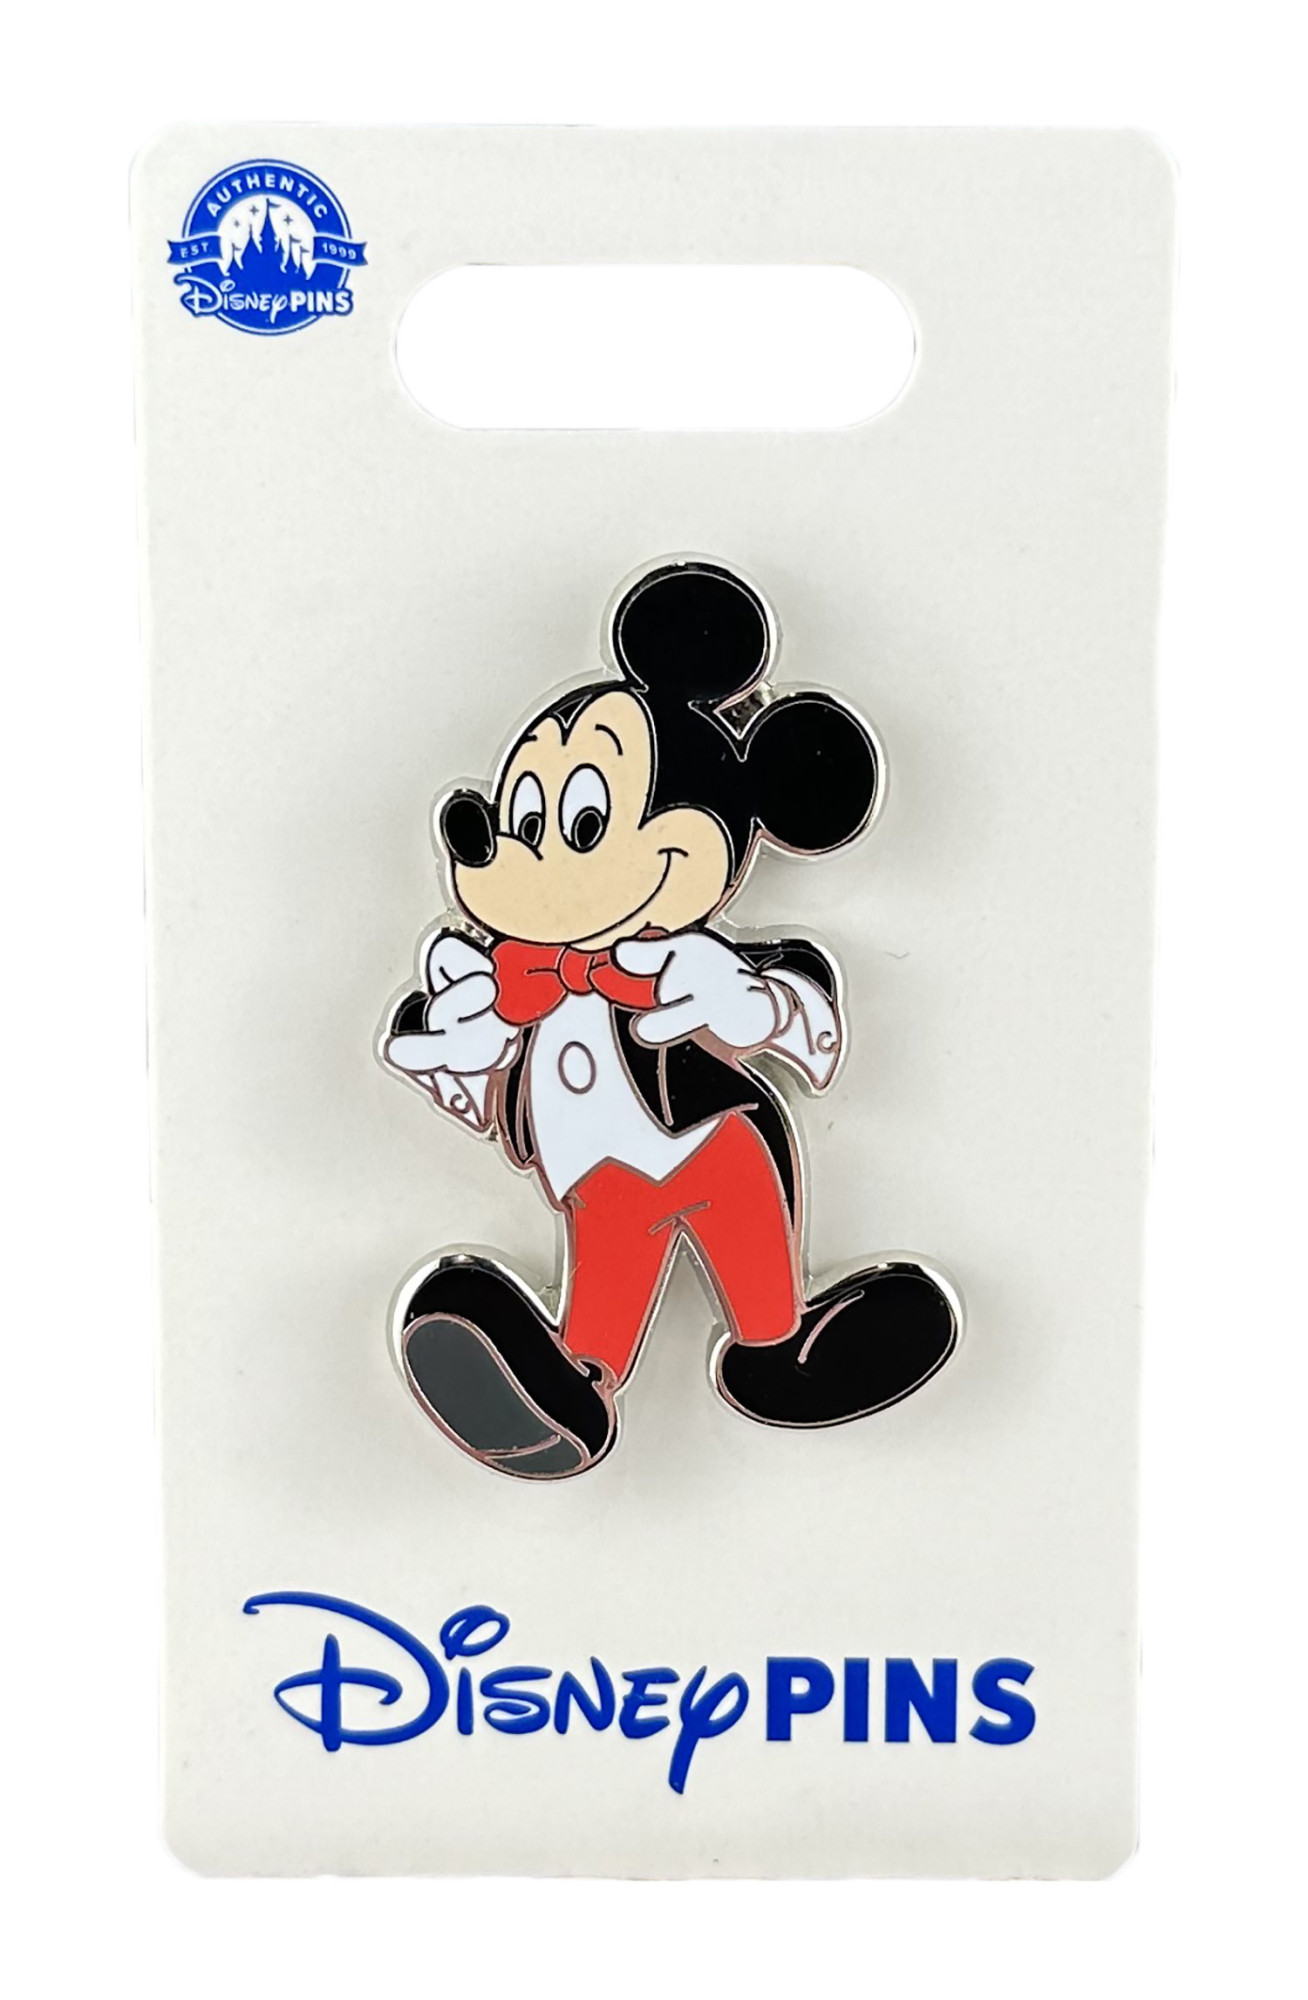 products Disney Pin - Mickey Mouse - Standing in a Tuxedo - Red Bowtie